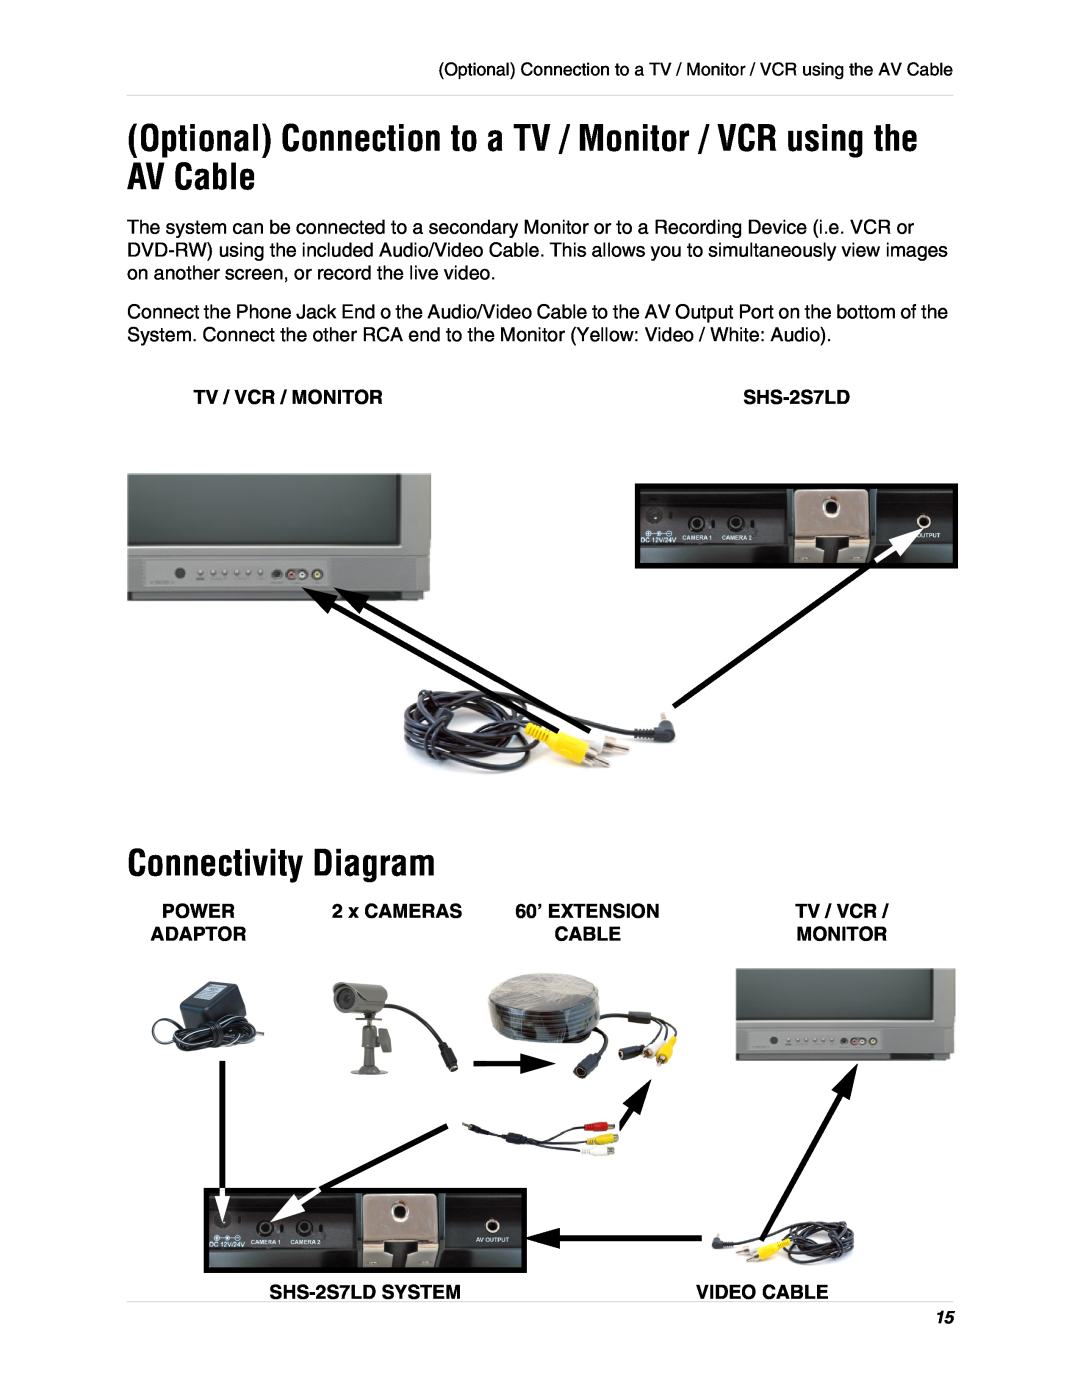 LOREX Technology SHS-2S7LD Series Connectivity Diagram, Tv / Vcr / Monitor, Power, x CAMERAS, Adaptor, Video Cable 